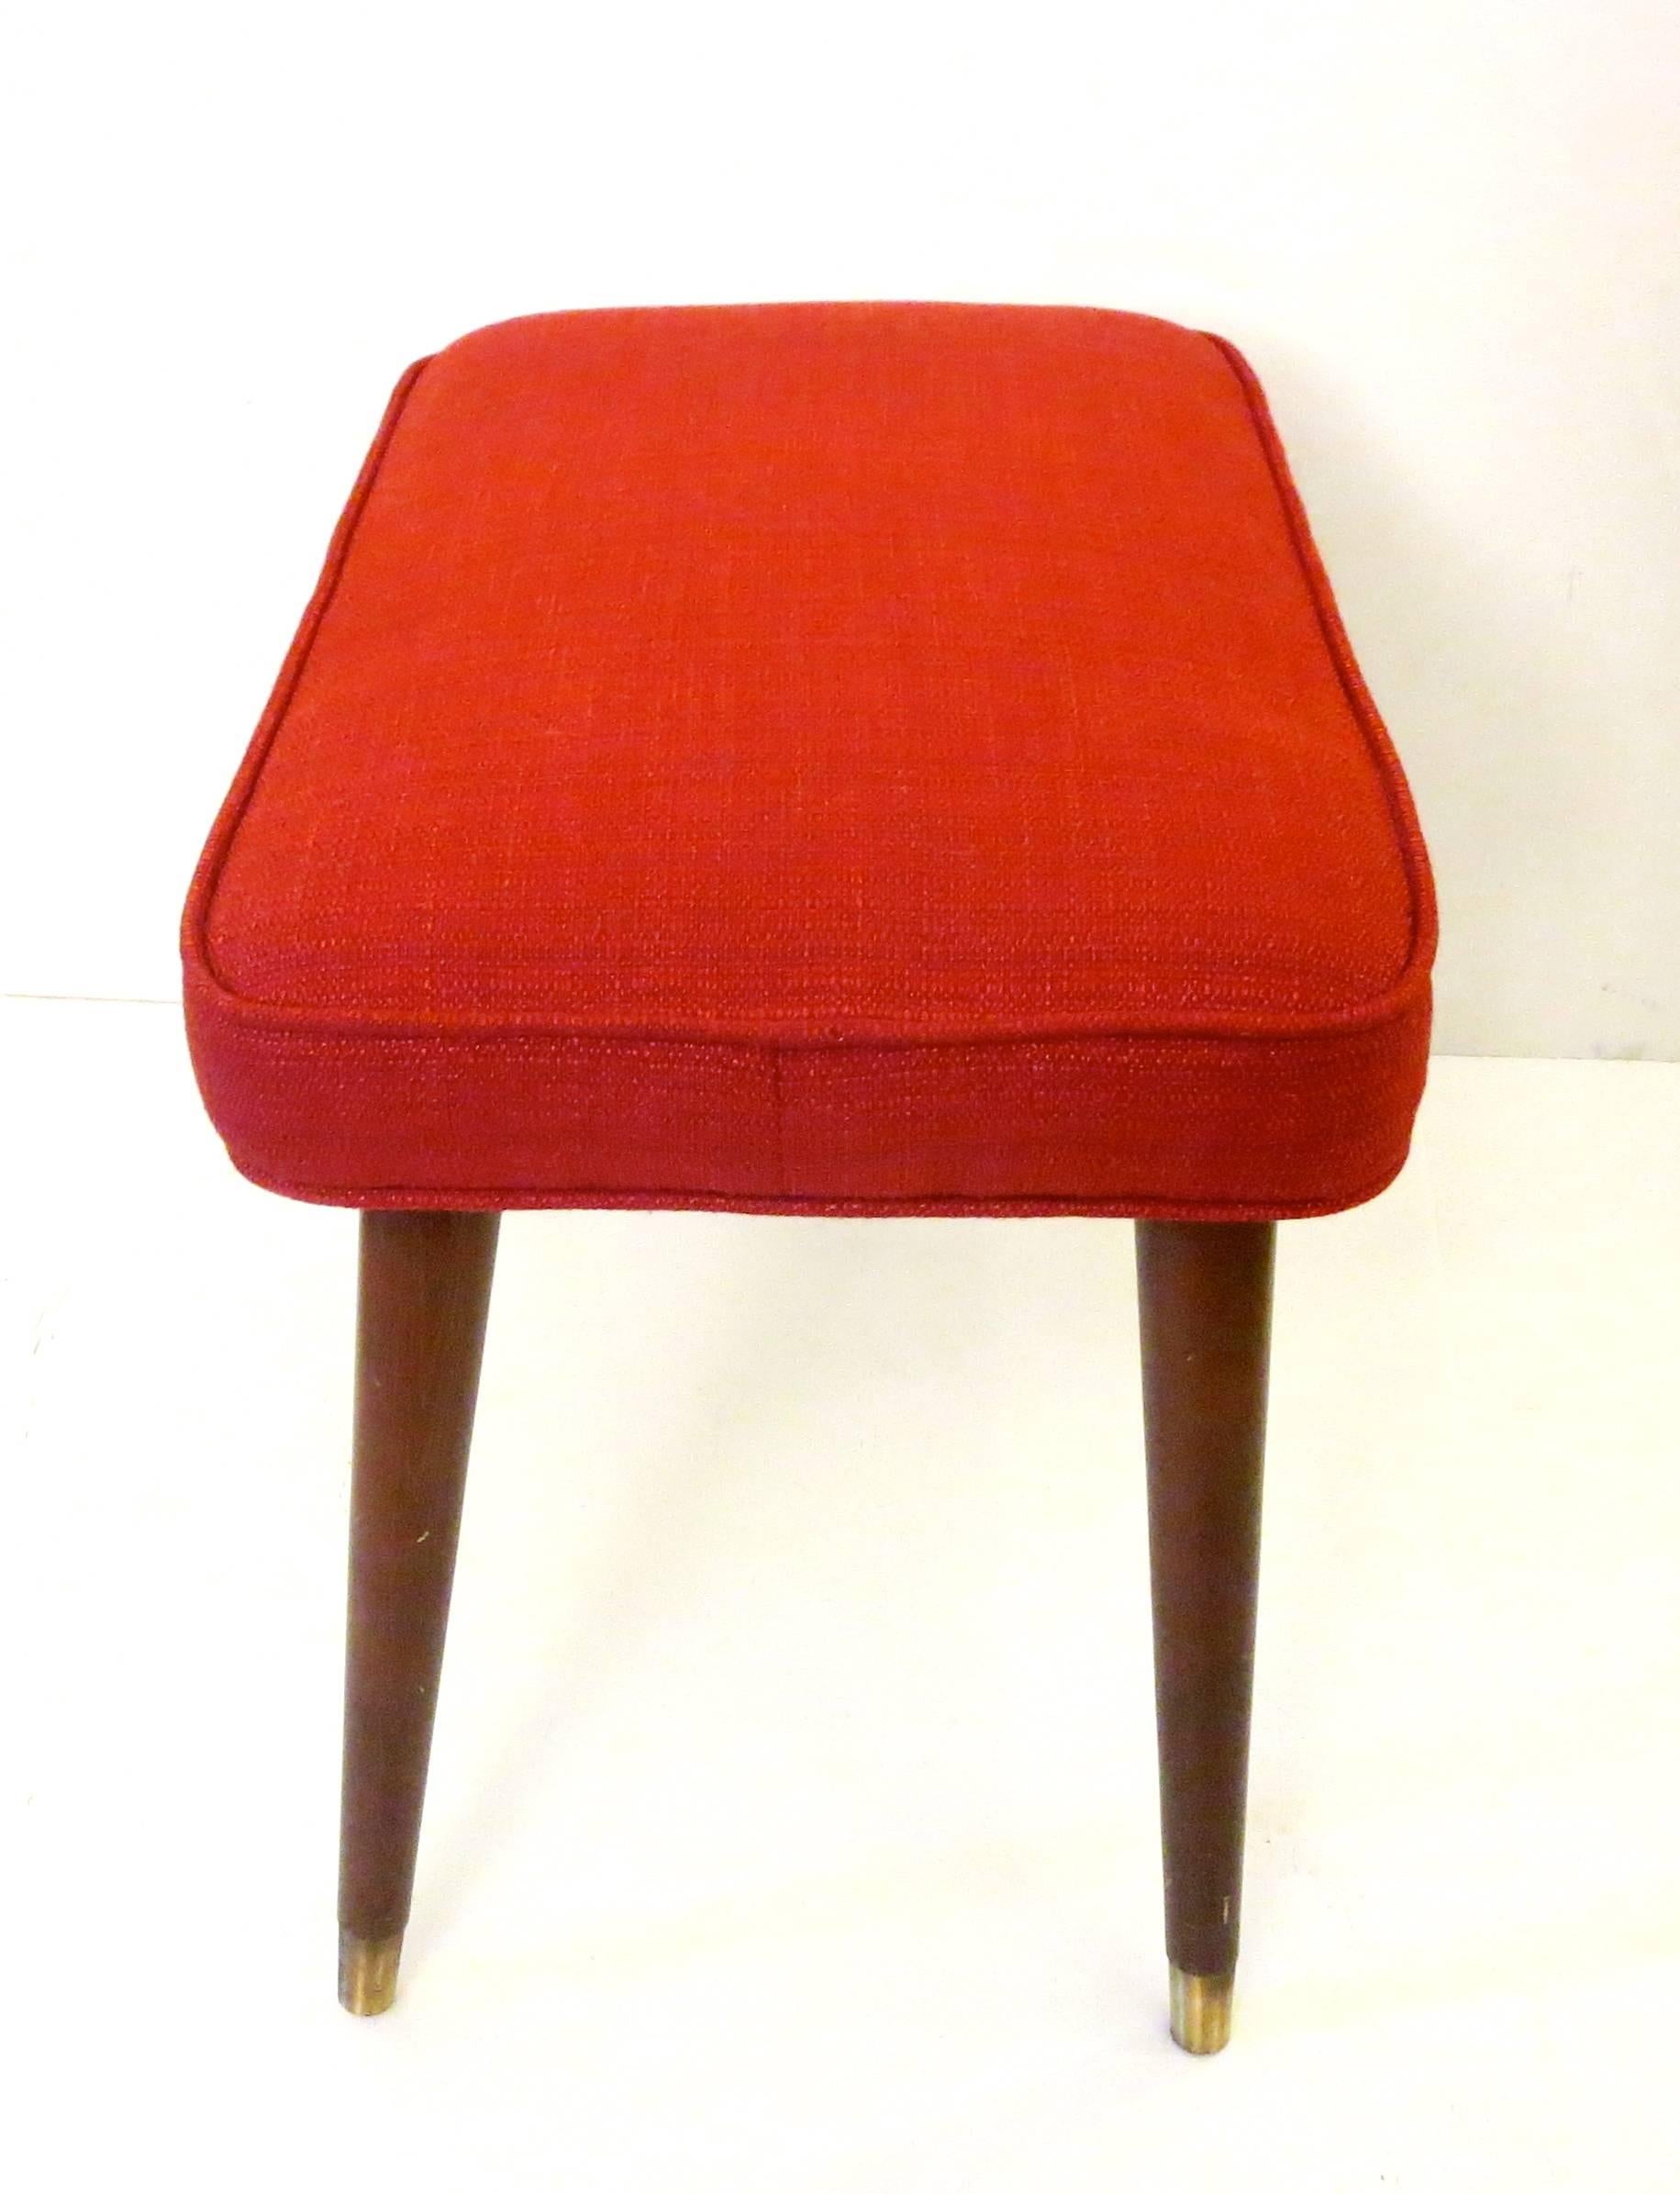 Simple elegant original footstool / ottoman circa 1950s freshly upholstered in red Knoll fabric, walnut finish tapper legs with brass polished tips, excellent condition new foam and fabric.